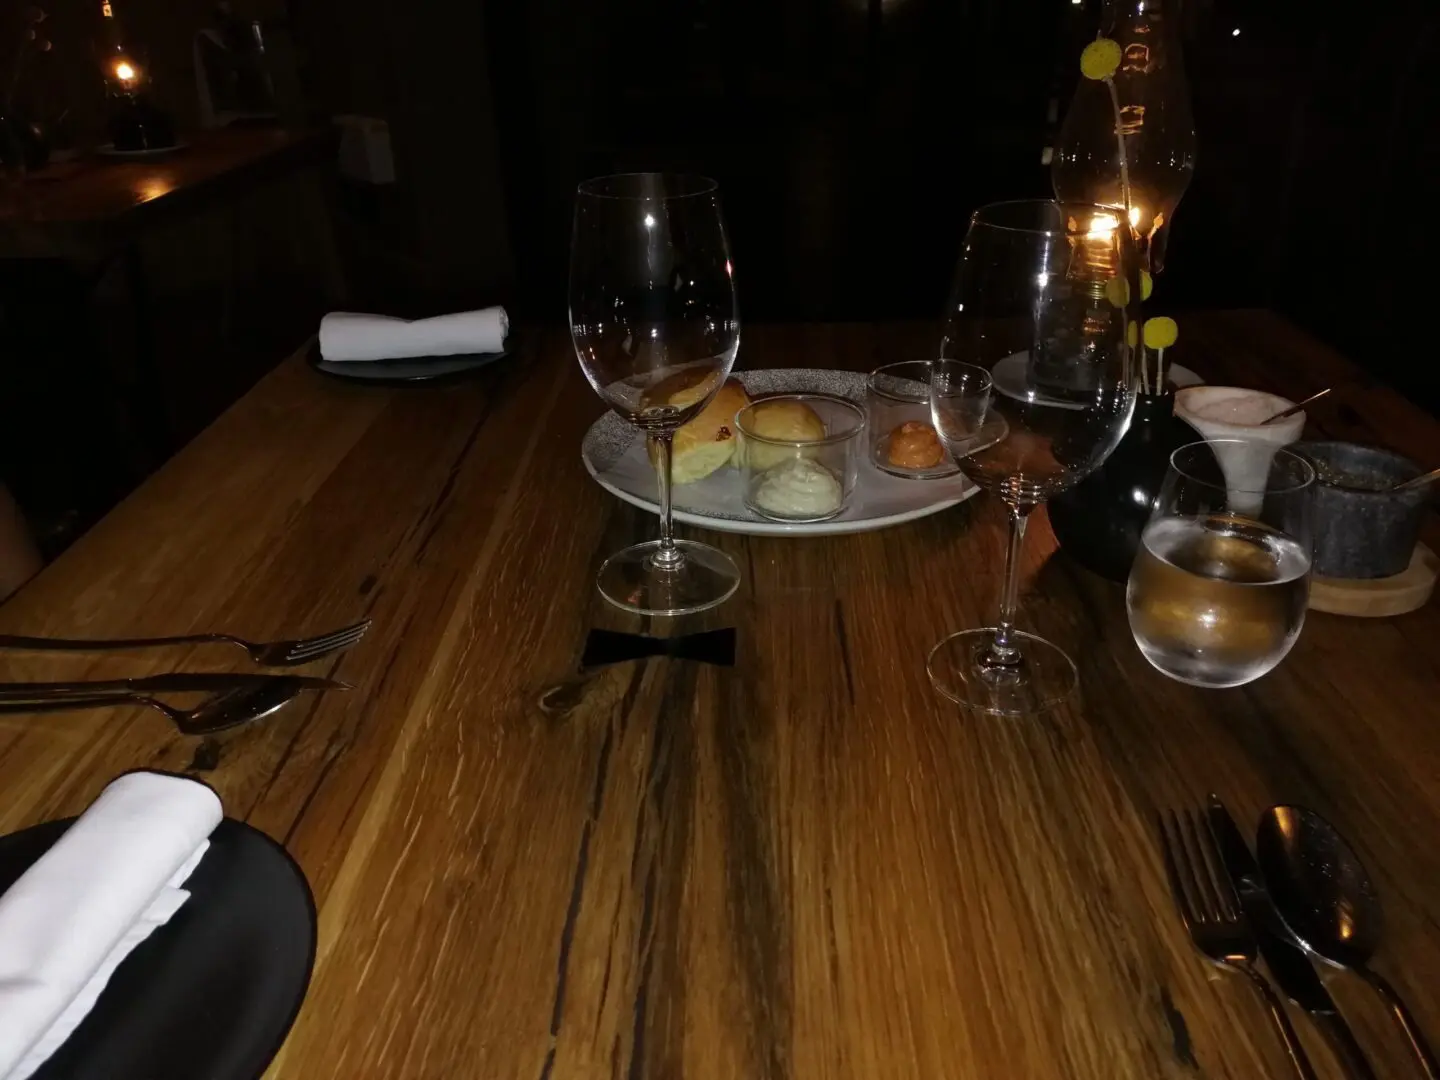 A wooden table with wine glasses and plates on it